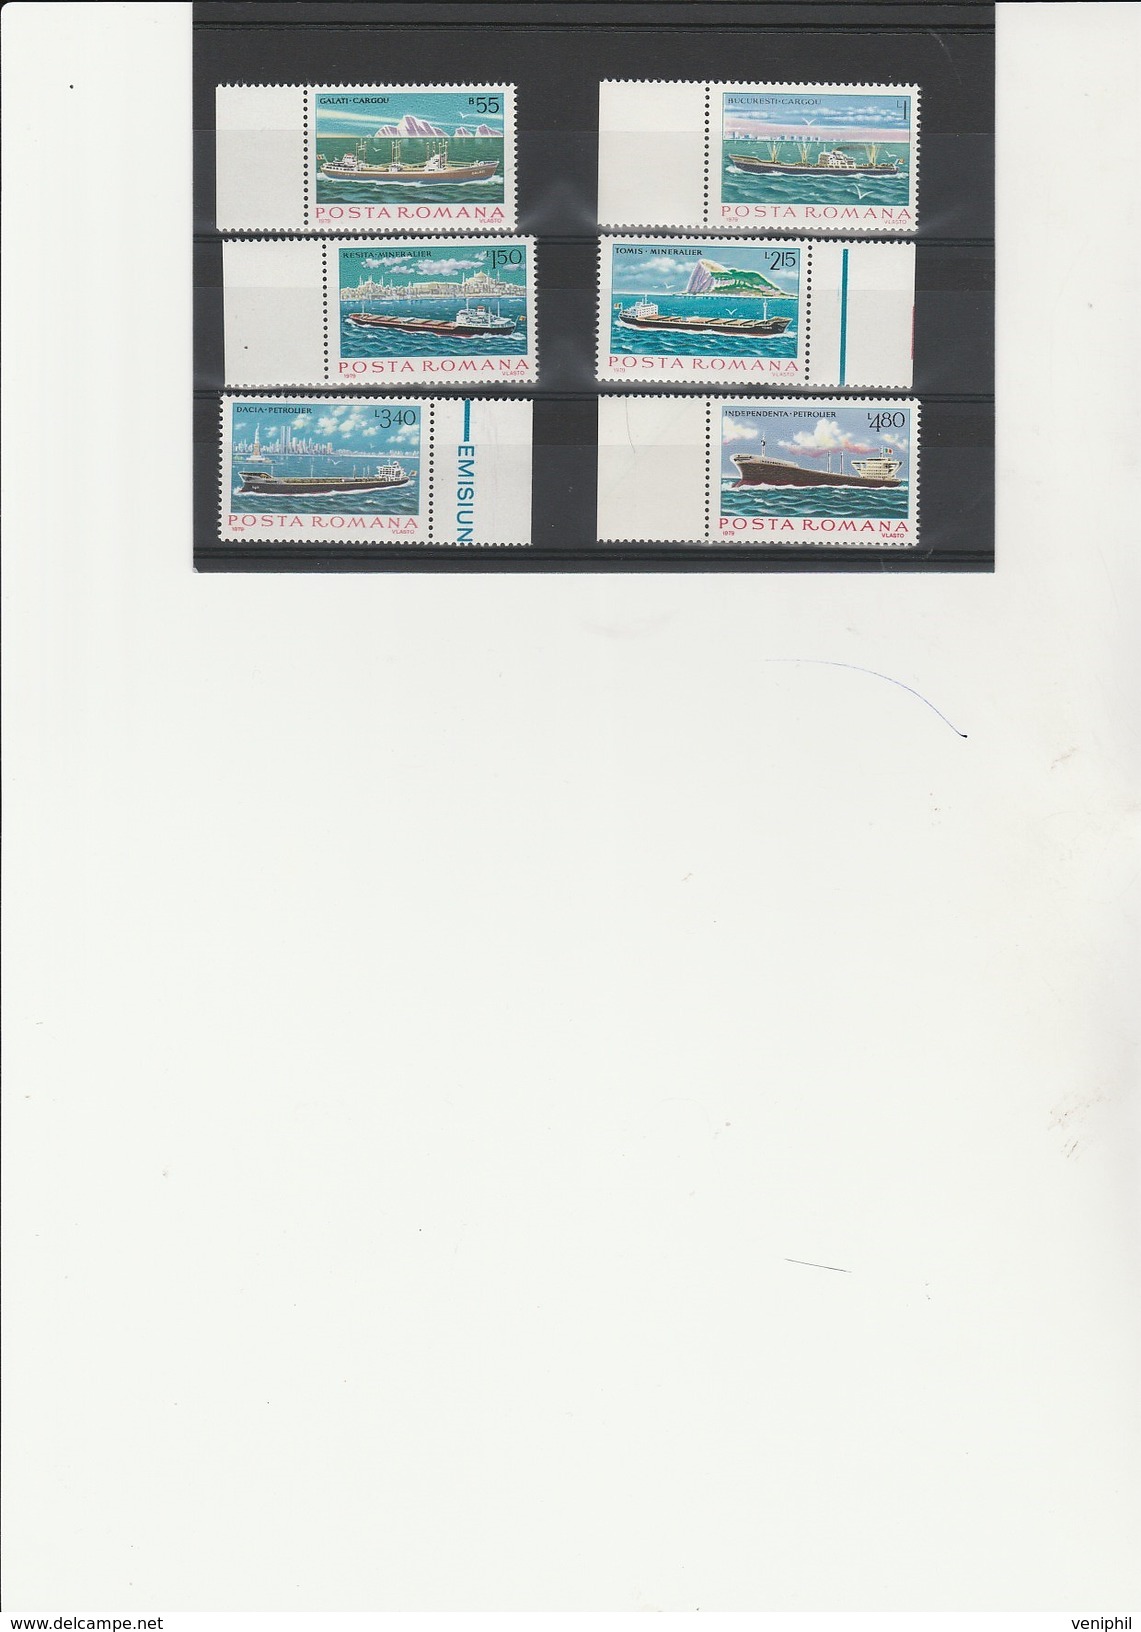 ROUMANIE  - TIMBRES N° 3191 A 3196 NEUF BORD DE FEUILLE -BATIMENT MARINE MARCHANDE - ANNEE 1979 - Unused Stamps